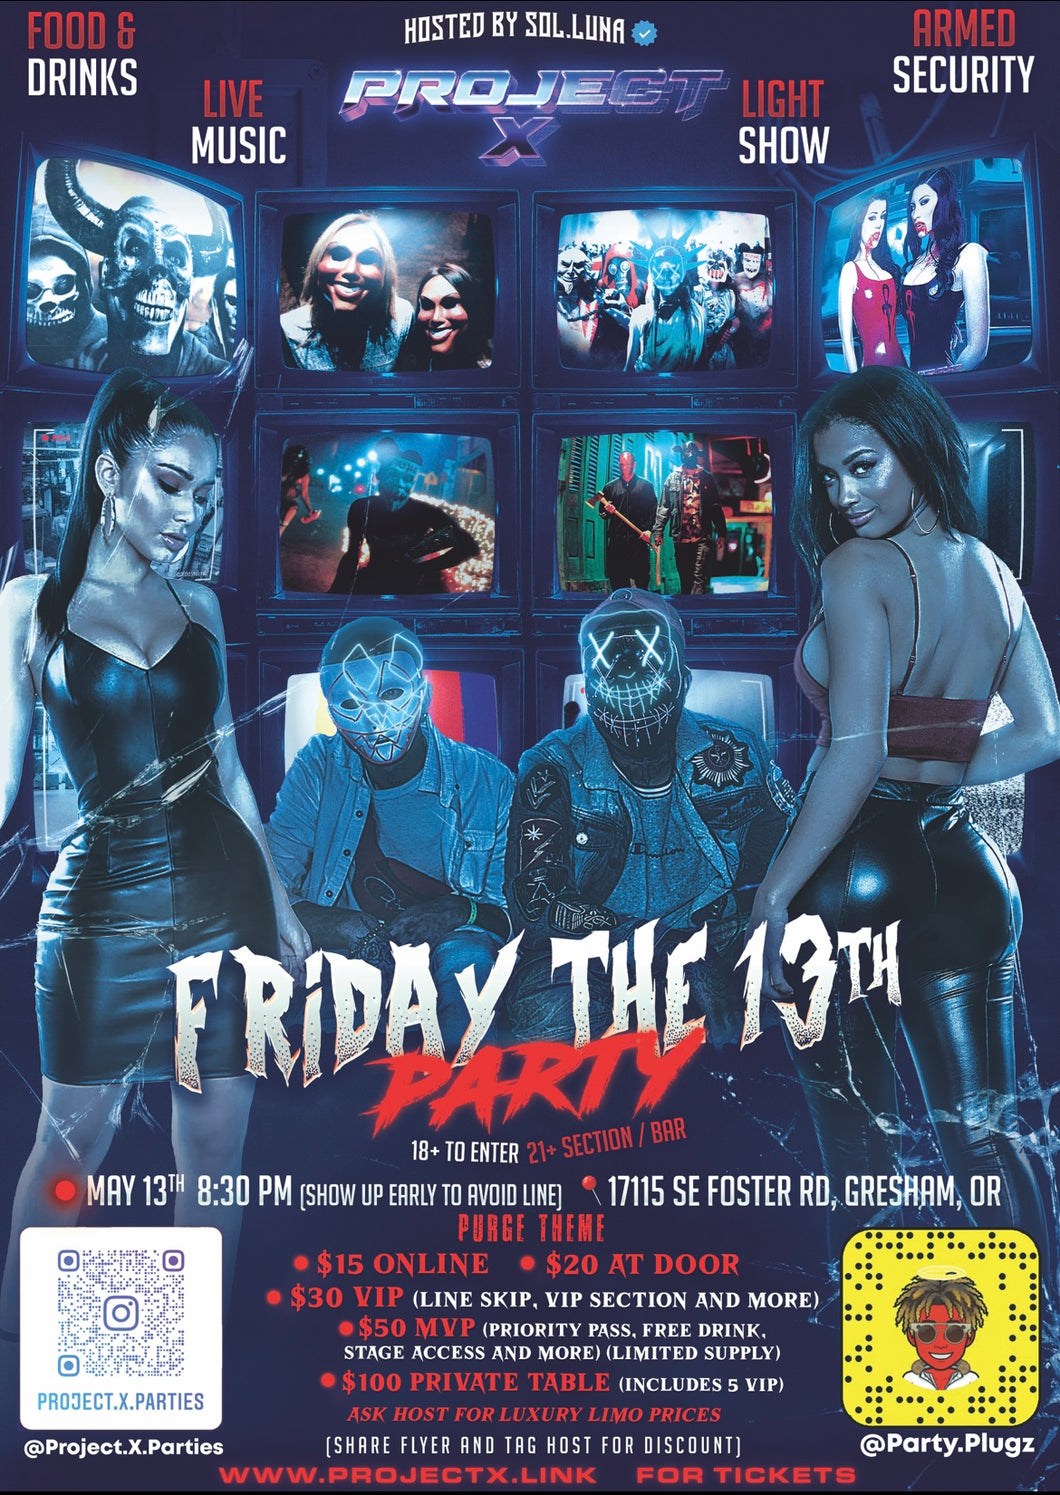 Friday The 13th Party VIP